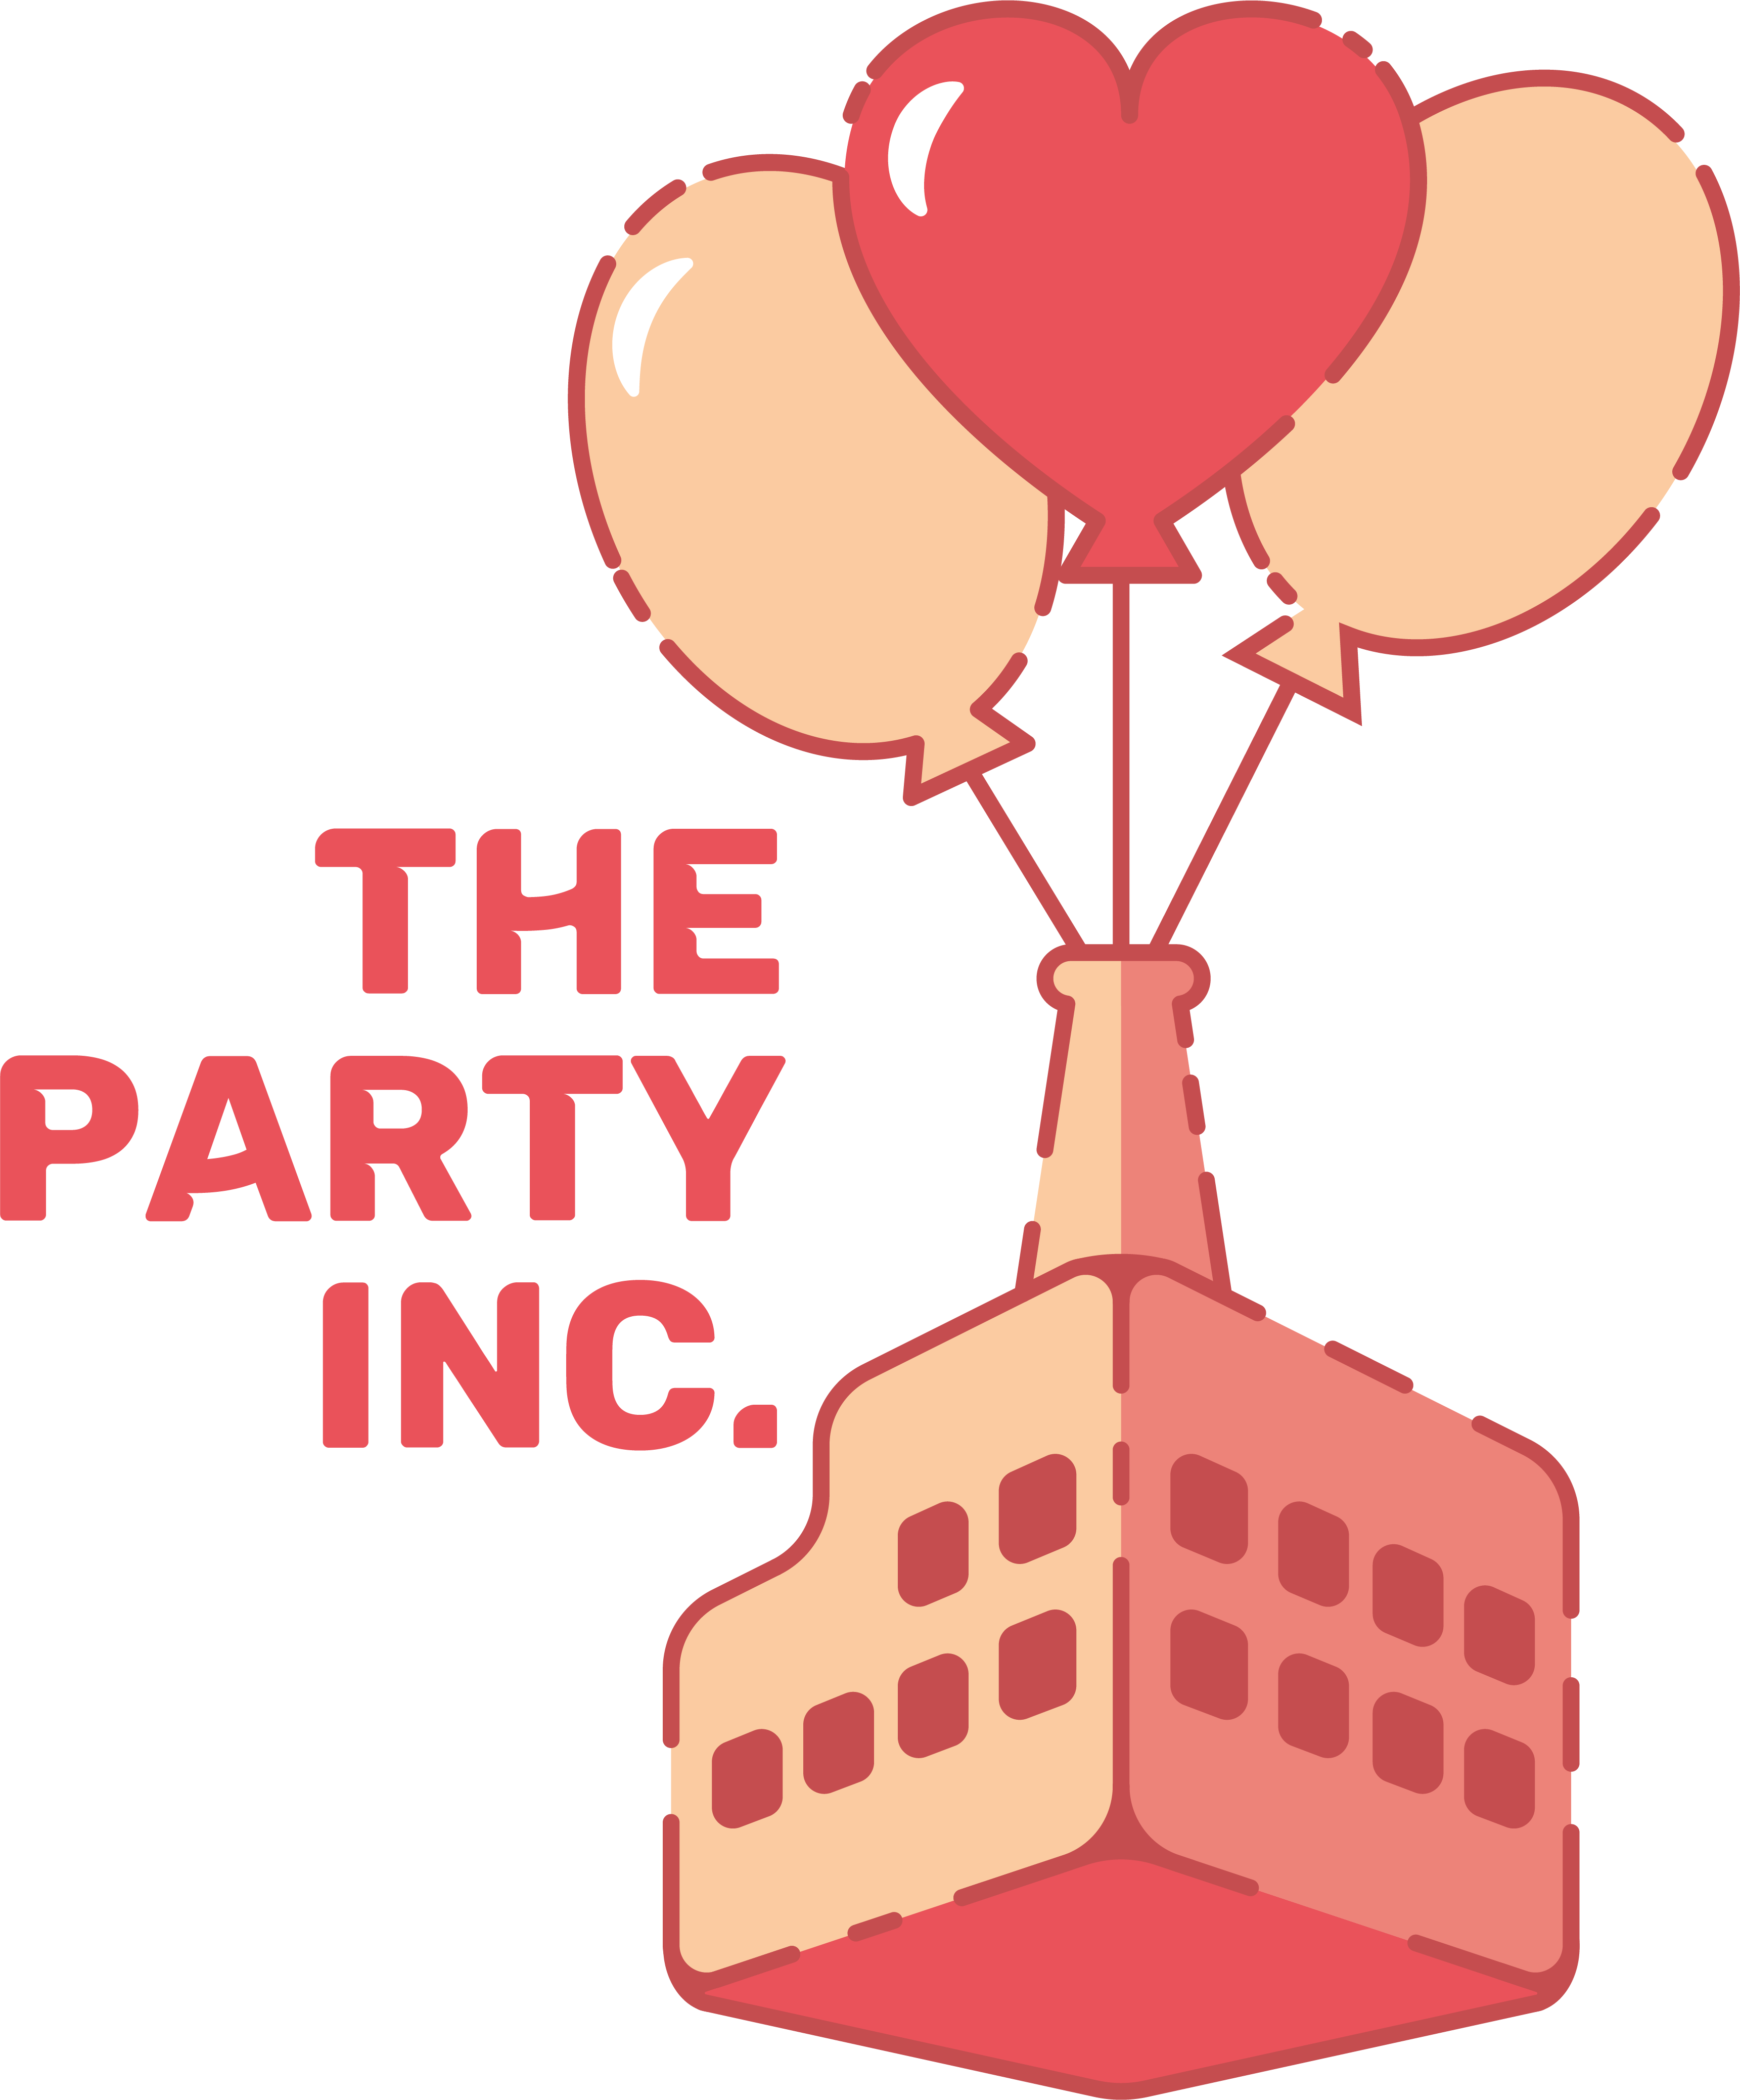 The Party Inc.